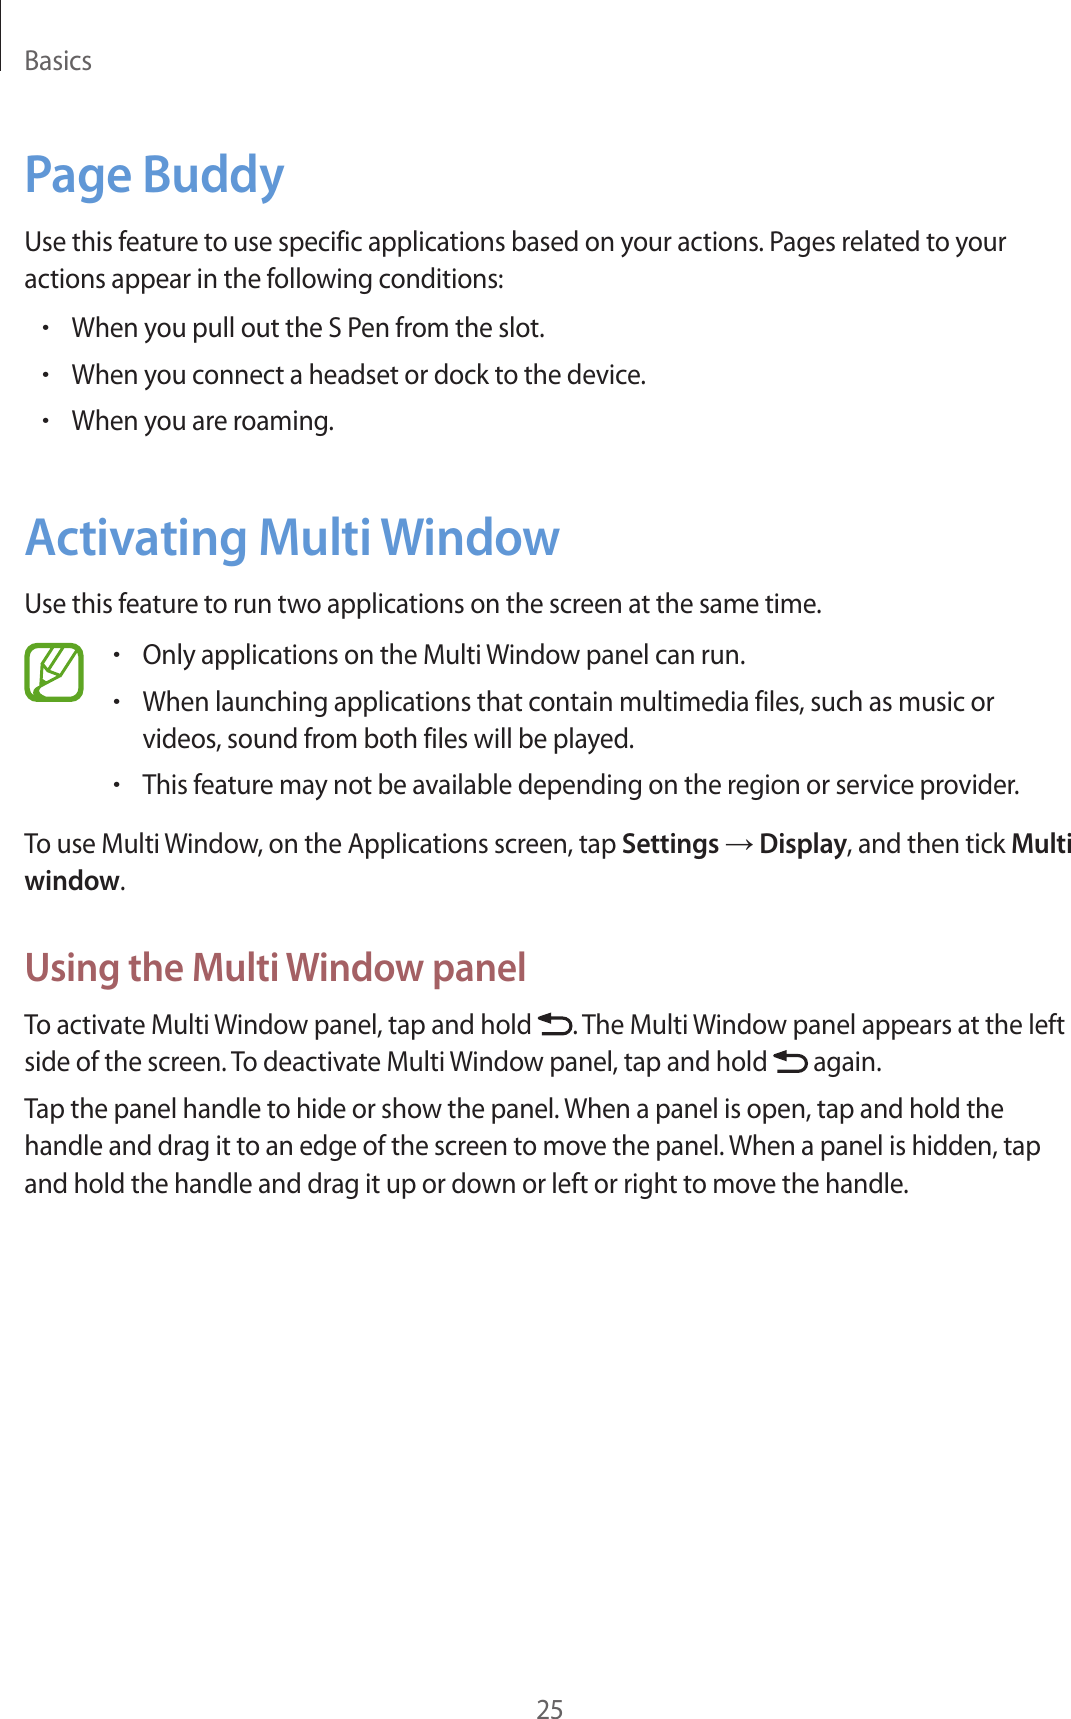 Basics25Page BuddyUse this feature to use specific applications based on your actions. Pages related to your actions appear in the following conditions:•When you pull out the S Pen from the slot.•When you connect a headset or dock to the device.•When you are roaming.Activating Multi WindowUse this feature to run two applications on the screen at the same time.•Only applications on the Multi Window panel can run.•When launching applications that contain multimedia files, such as music or videos, sound from both files will be played.•This feature may not be available depending on the region or service provider.To use Multi Window, on the Applications screen, tap Settings → Display, and then tick Multi window.Using the Multi Window panelTo activate Multi Window panel, tap and hold  . The Multi Window panel appears at the left side of the screen. To deactivate Multi Window panel, tap and hold   again.Tap the panel handle to hide or show the panel. When a panel is open, tap and hold the handle and drag it to an edge of the screen to move the panel. When a panel is hidden, tap and hold the handle and drag it up or down or left or right to move the handle.